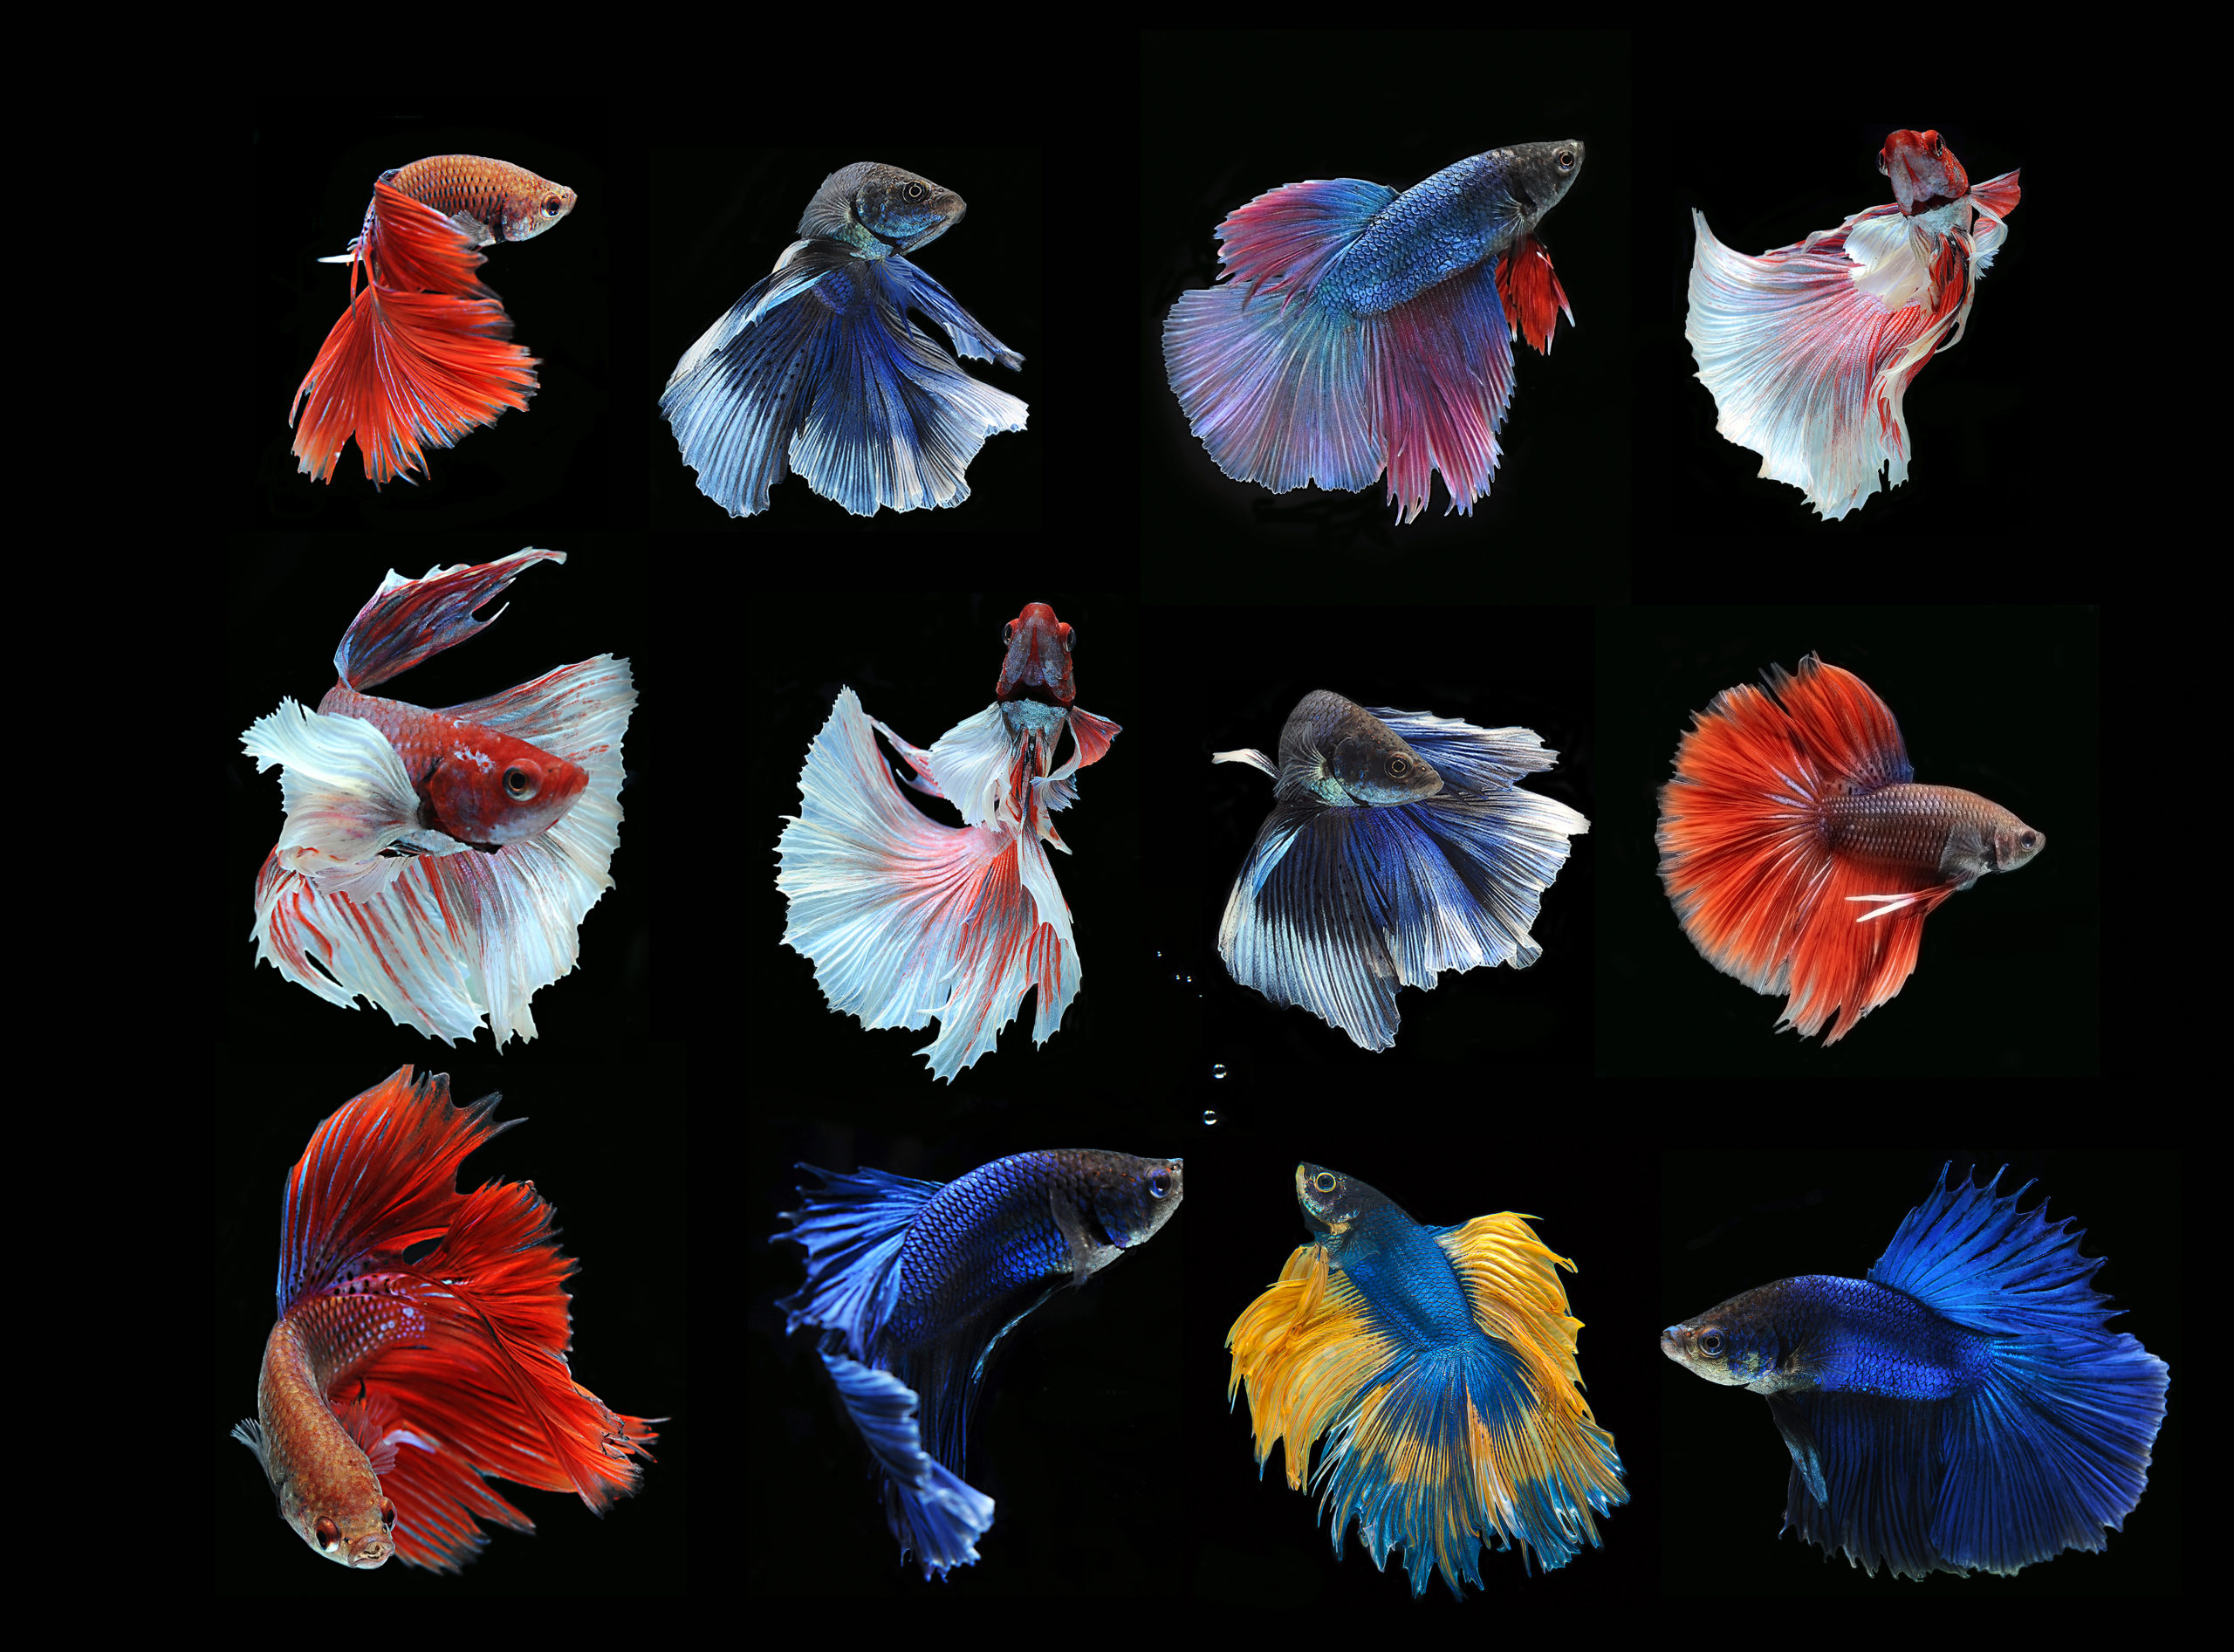 Comparison of solid, multicolor, and patterned betta fish